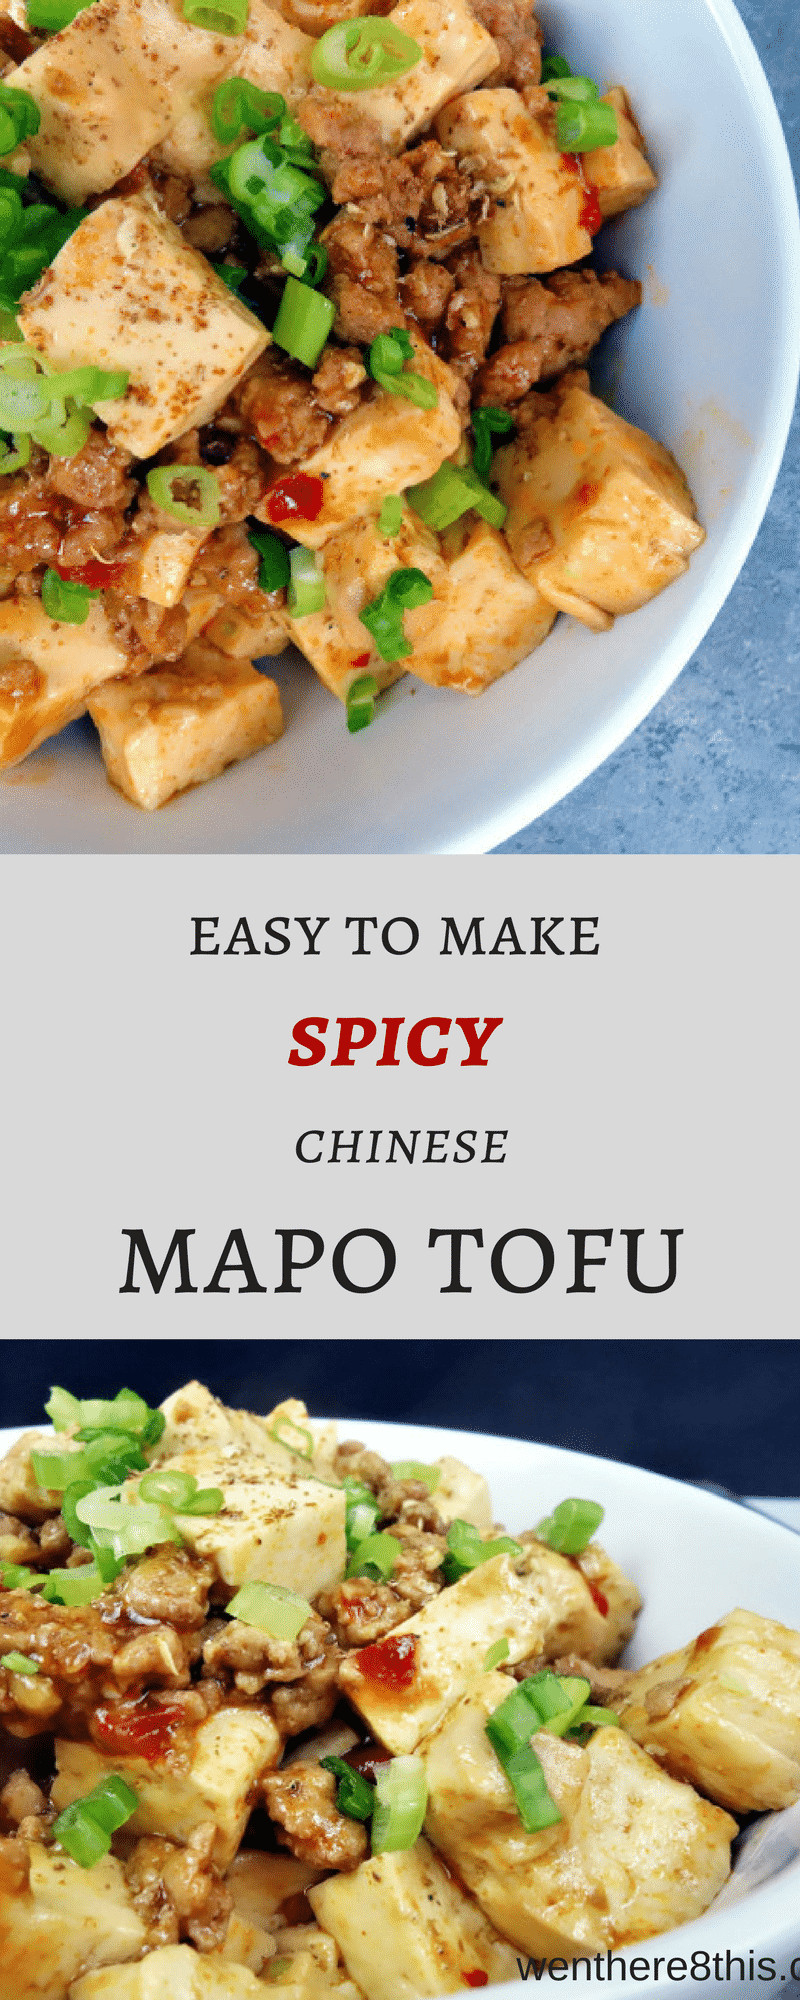 Easy Spicy Tofu Recipes
 Easy to Make Spicy Chinese Mapo Tofu Went Here 8 This